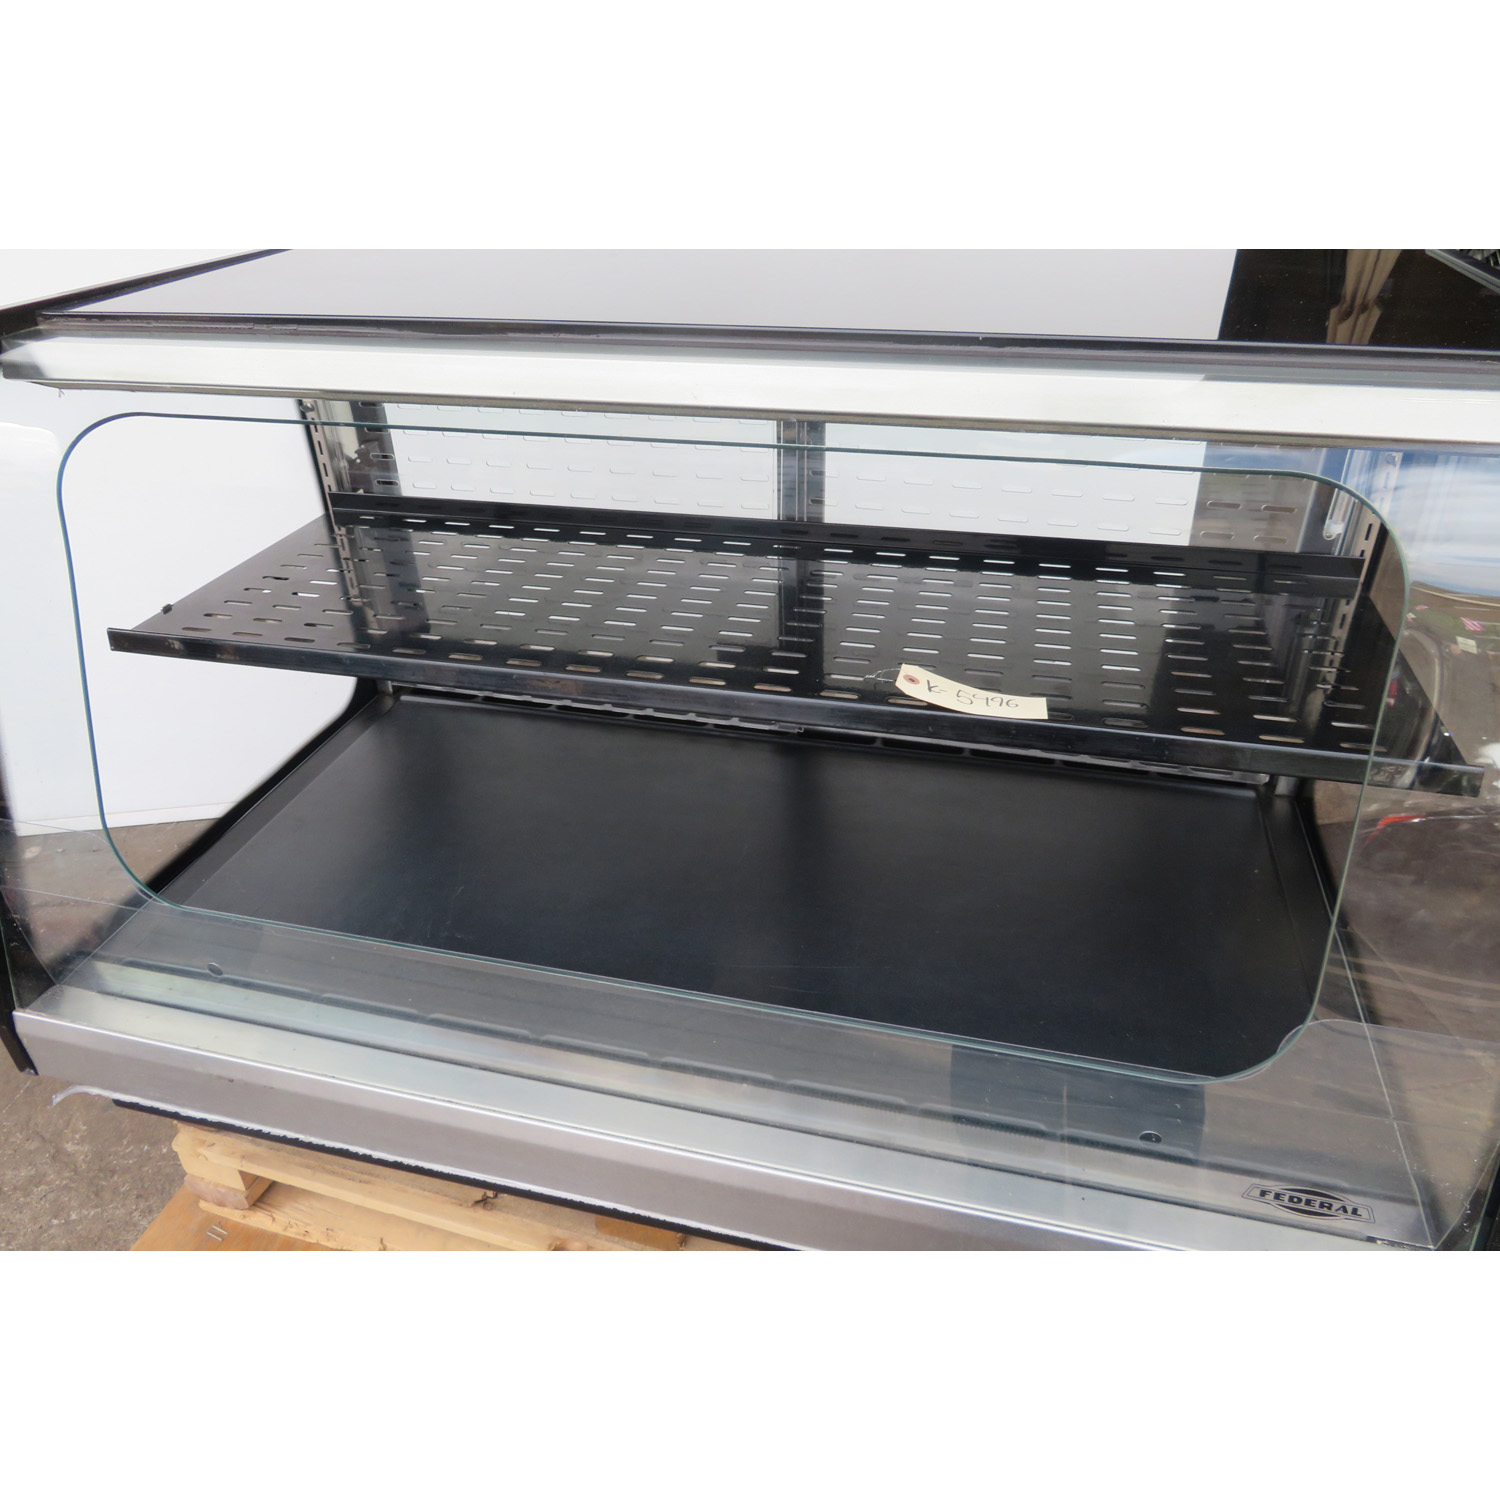 Federal CRR4828SS Refrigerator Display Case  - Remote, Used Excellent Condition image 1